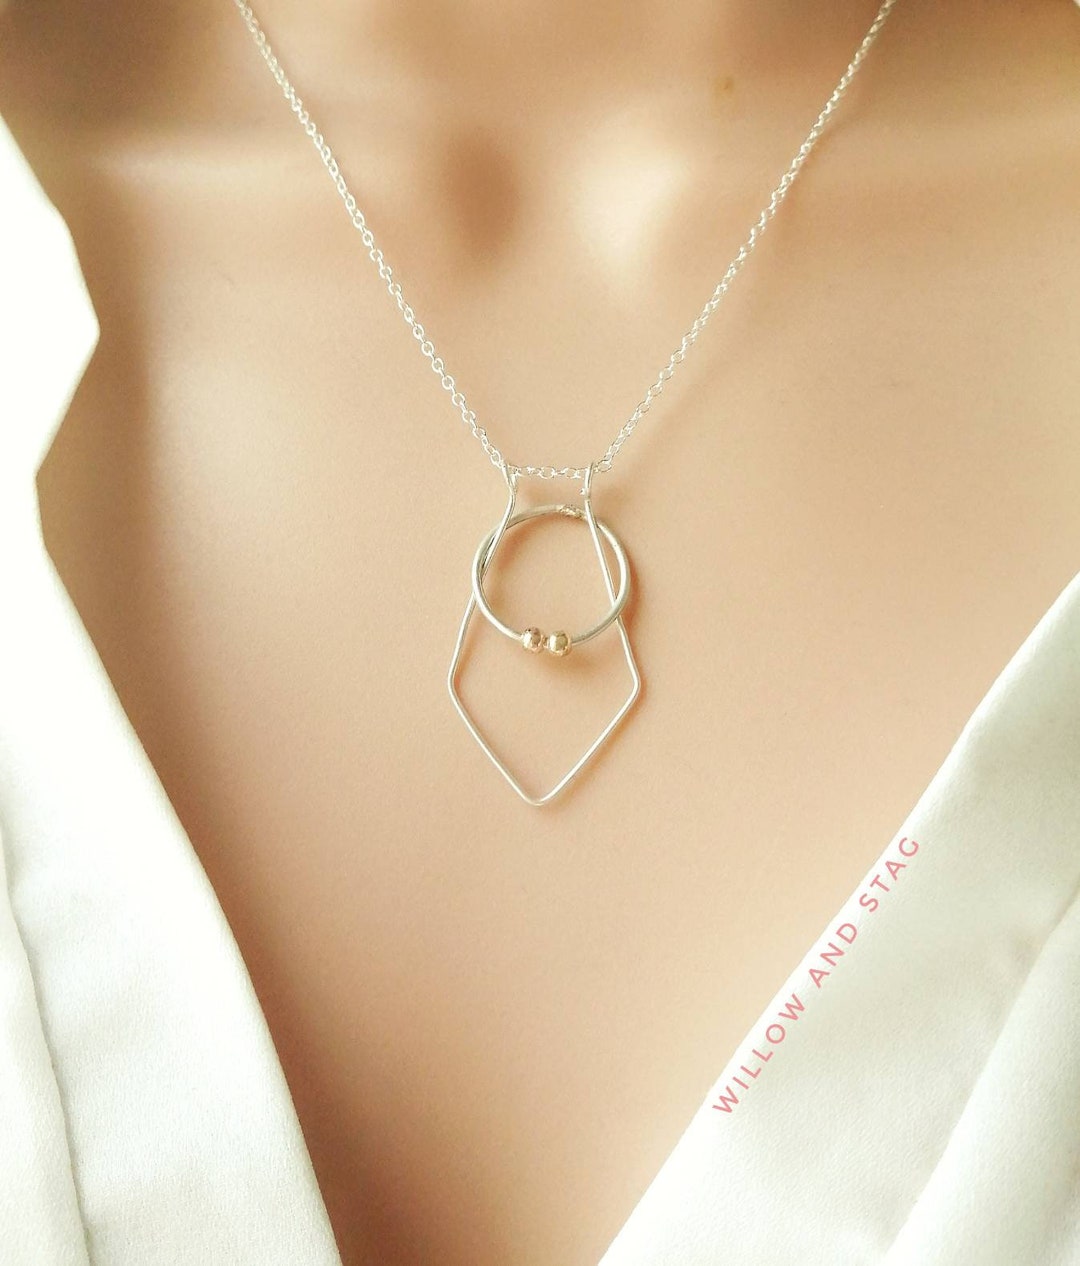 Double Geometric Ring Holder Necklace Medical Ring Holder 